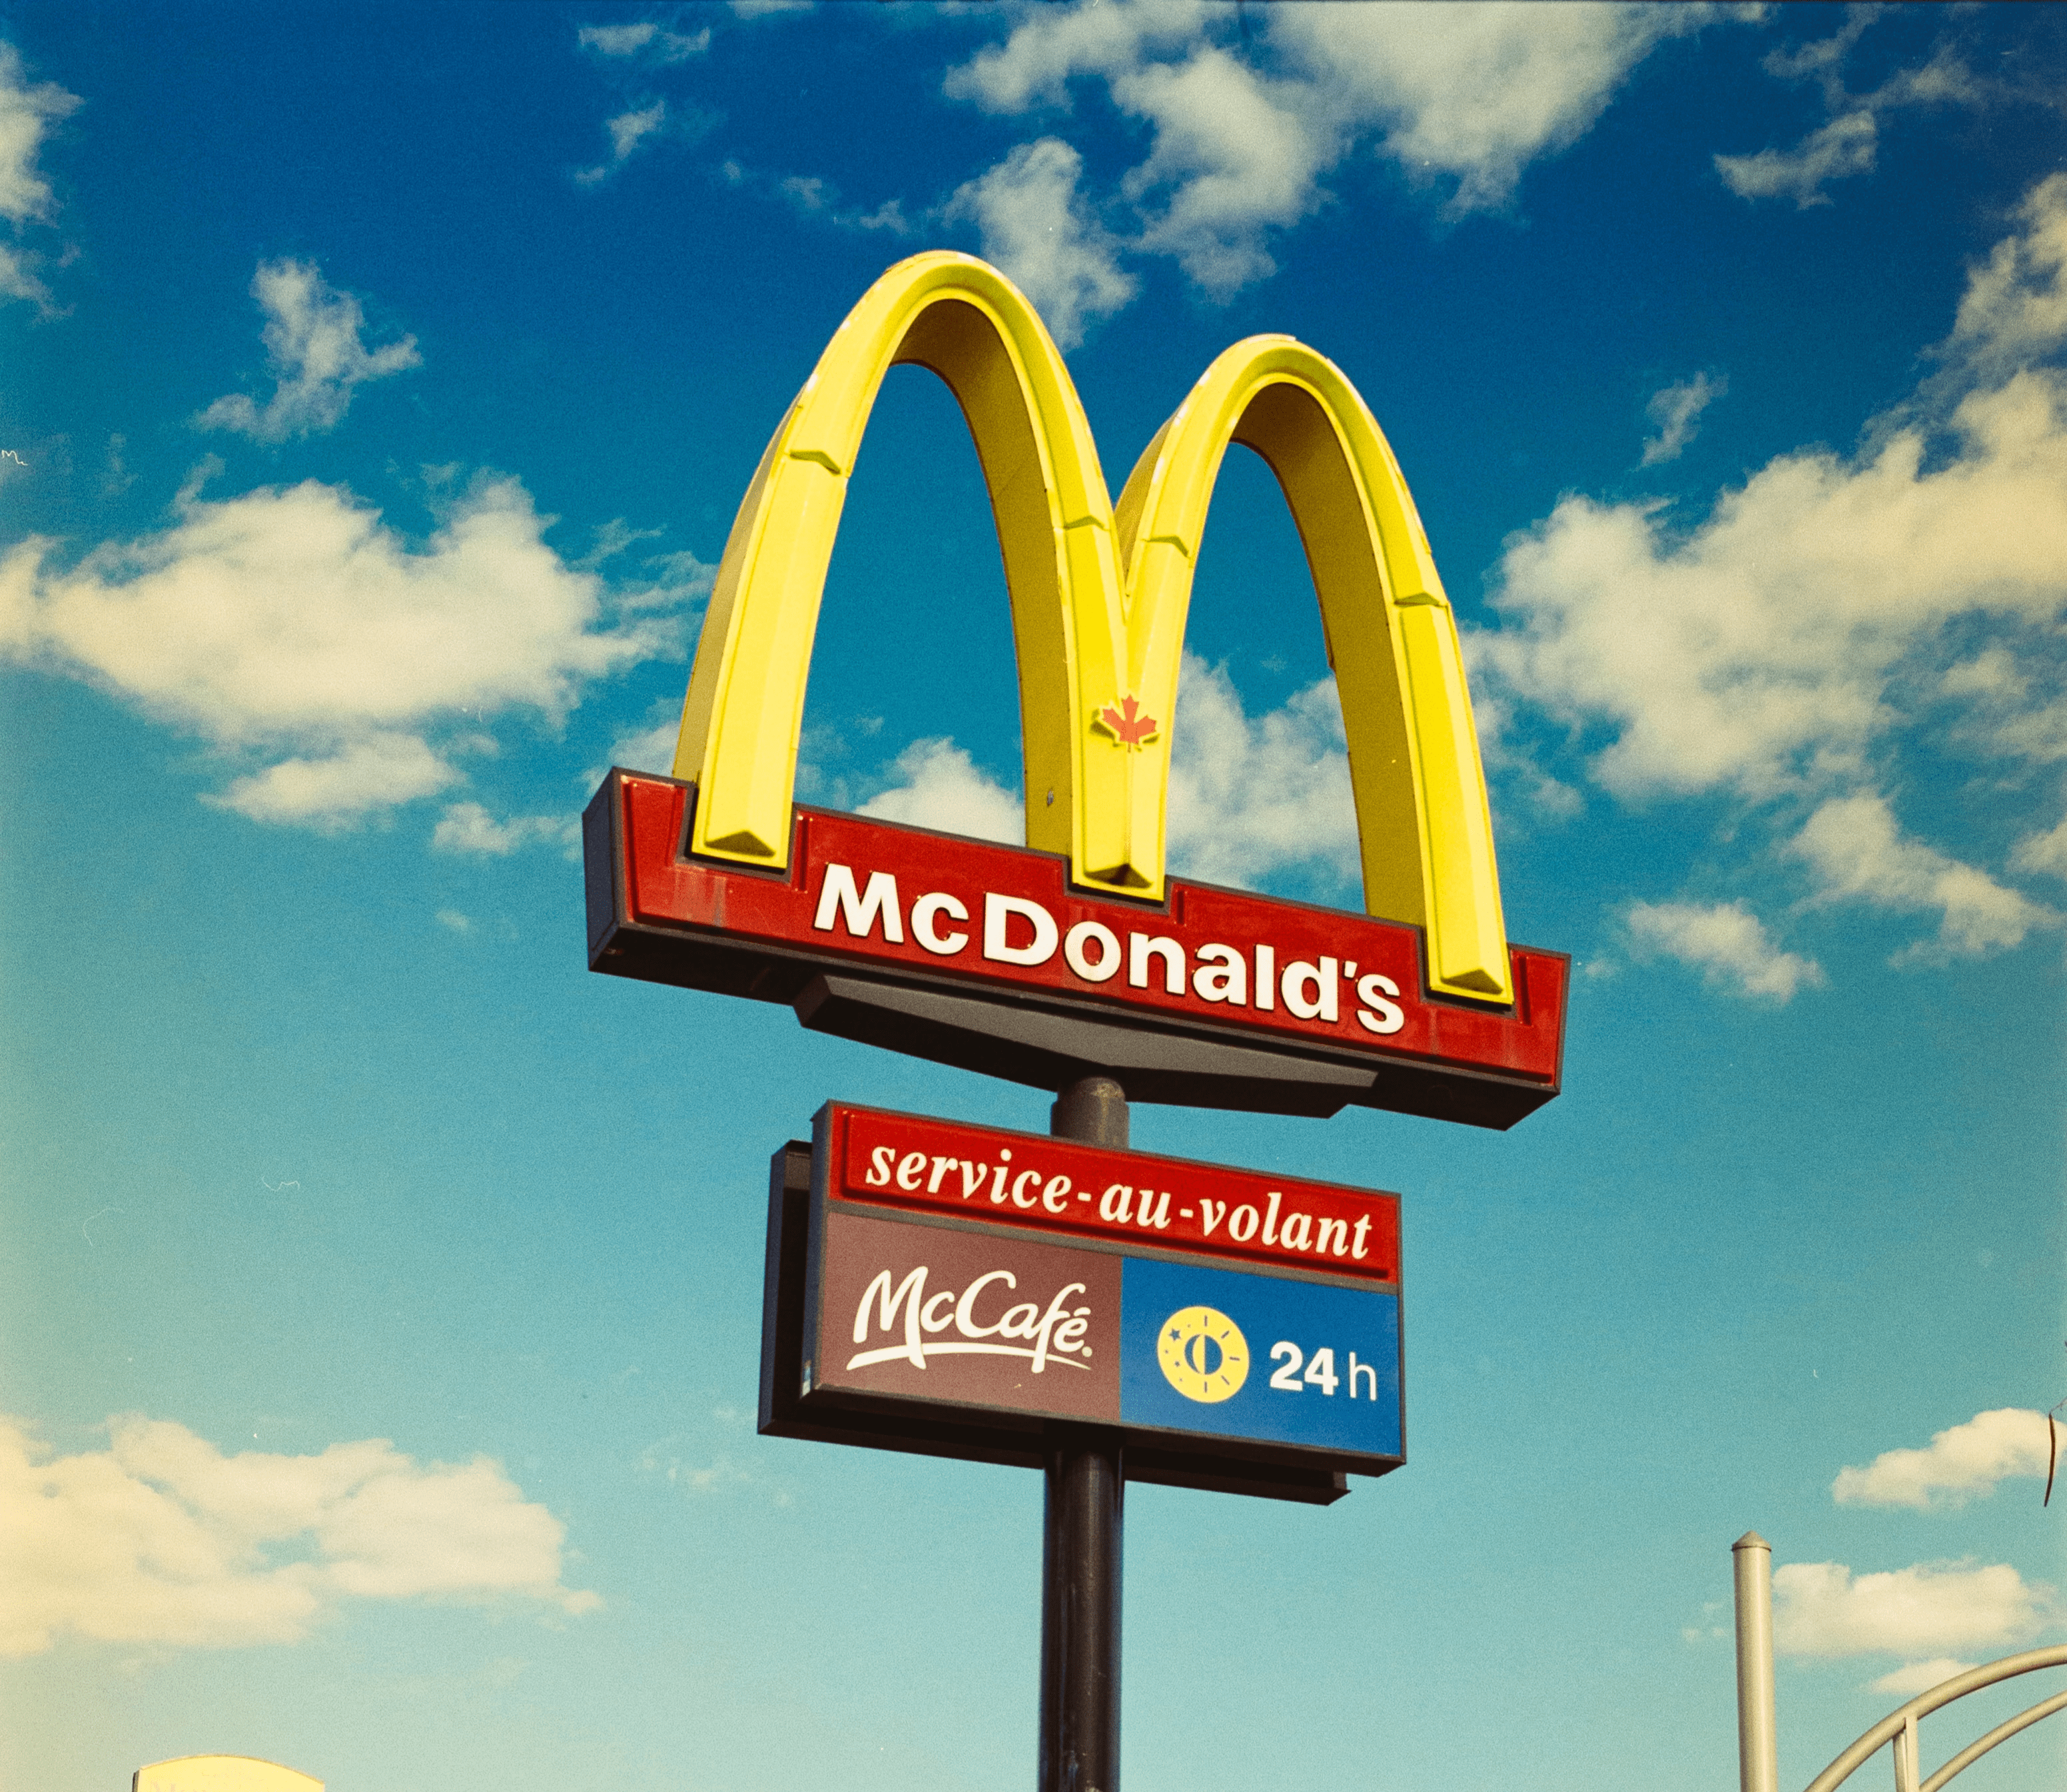 Big Scholarships for Students Offered by Mcdonald's